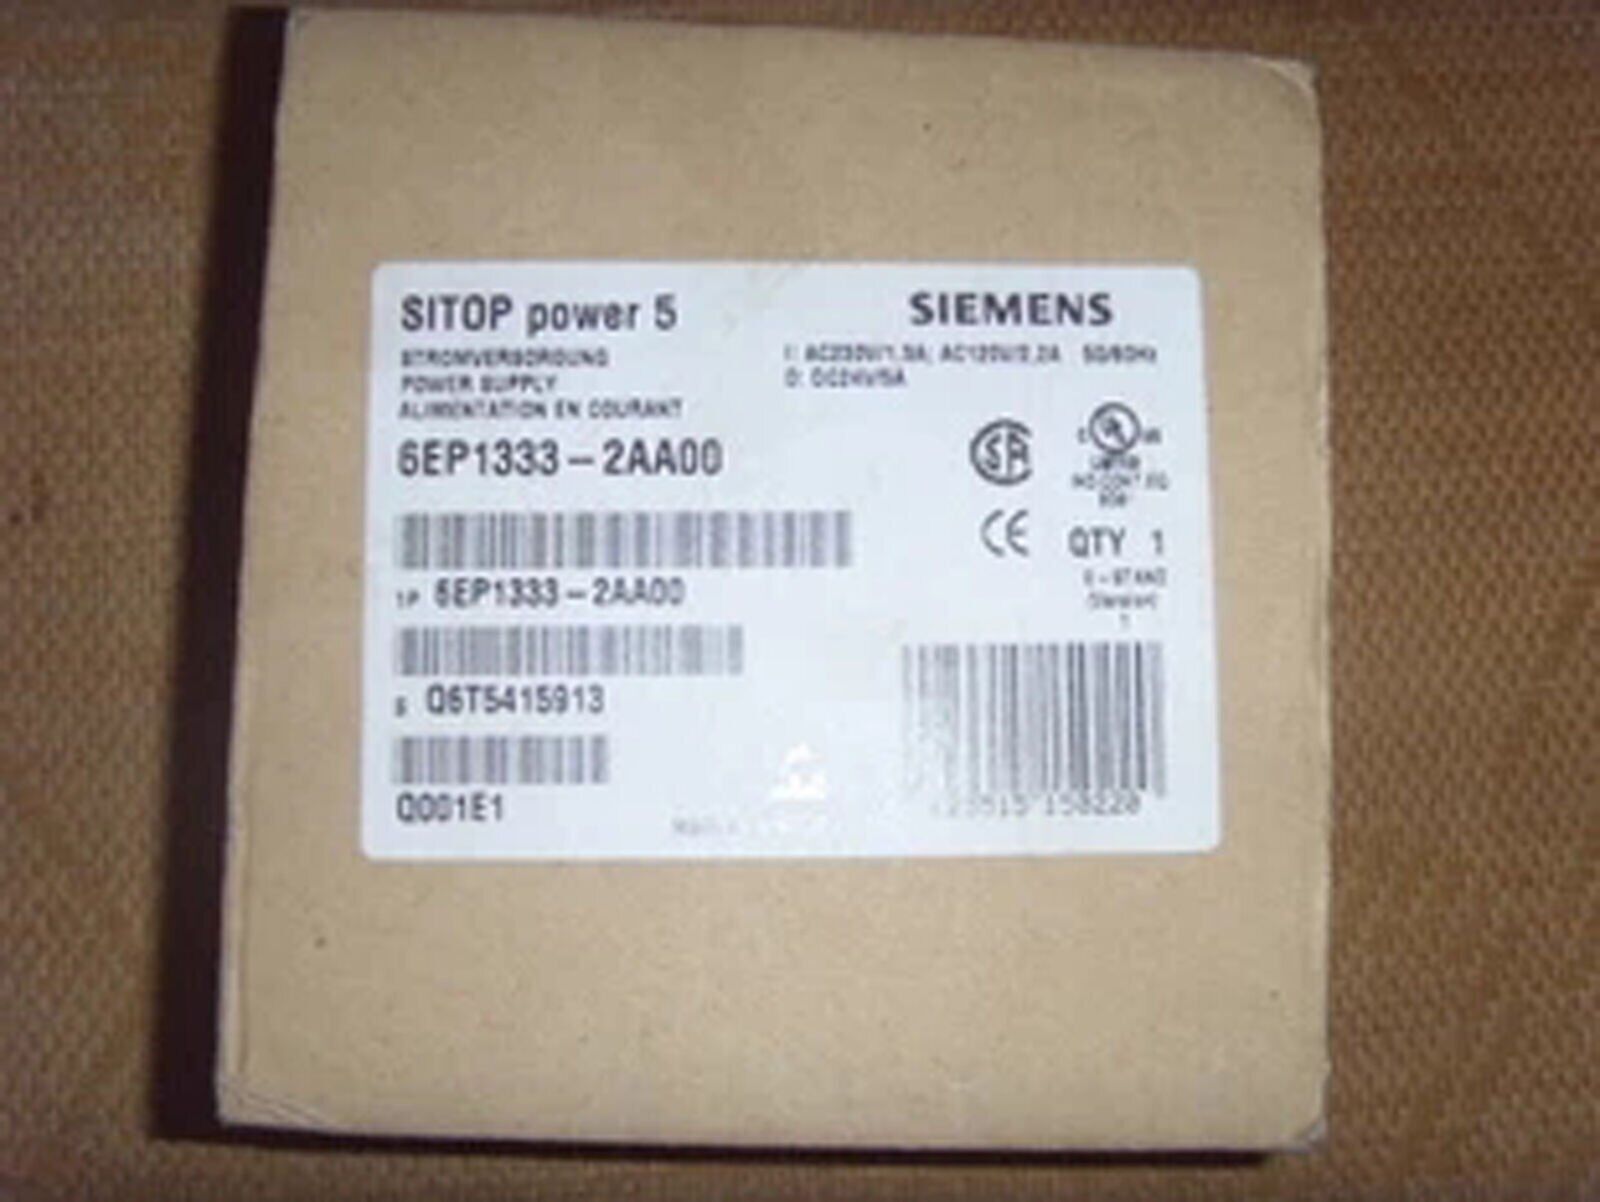 new ONE  Siemens Power Supply 6EP1333-2AA00 SITOP POWER One year